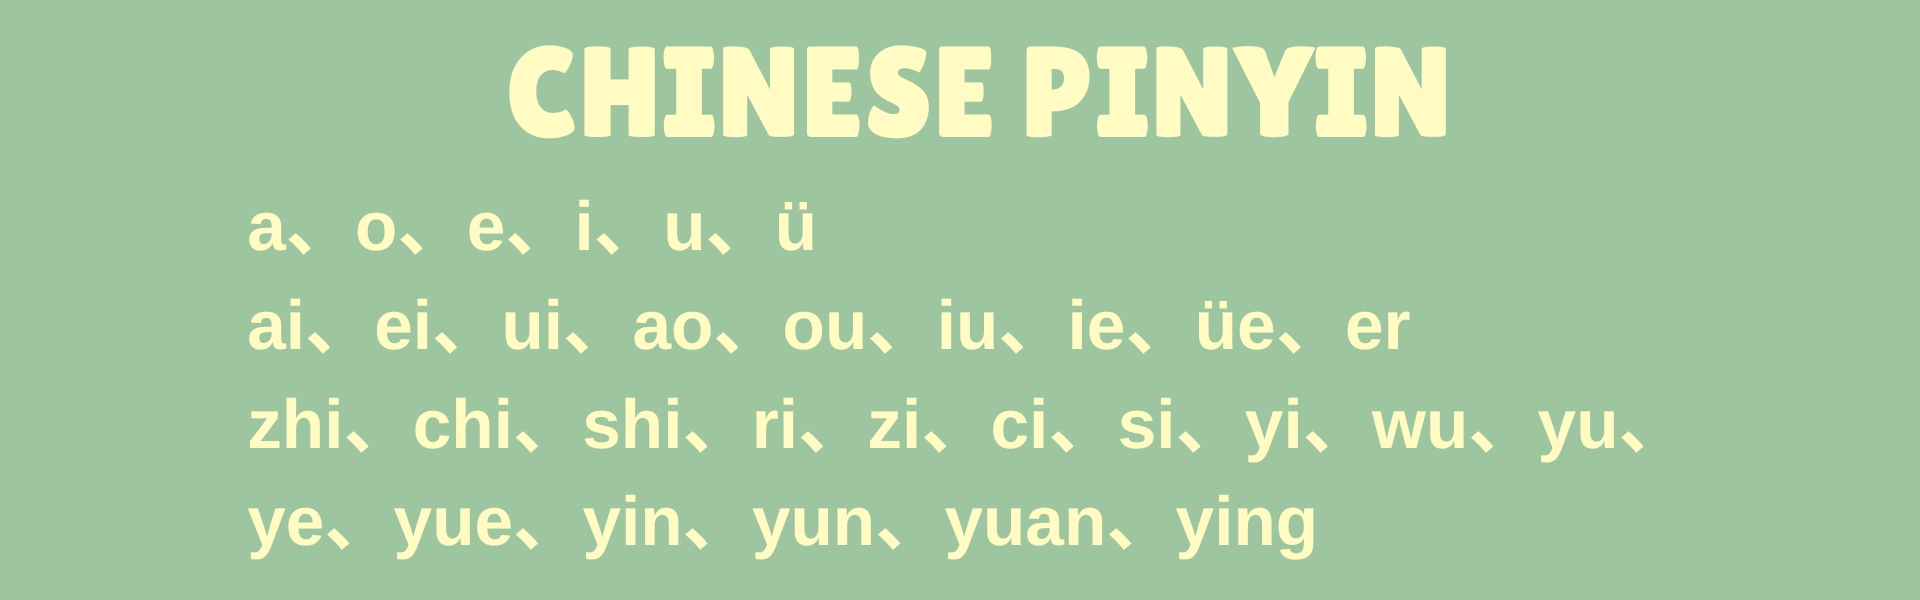 click here to know more about Echineselearning